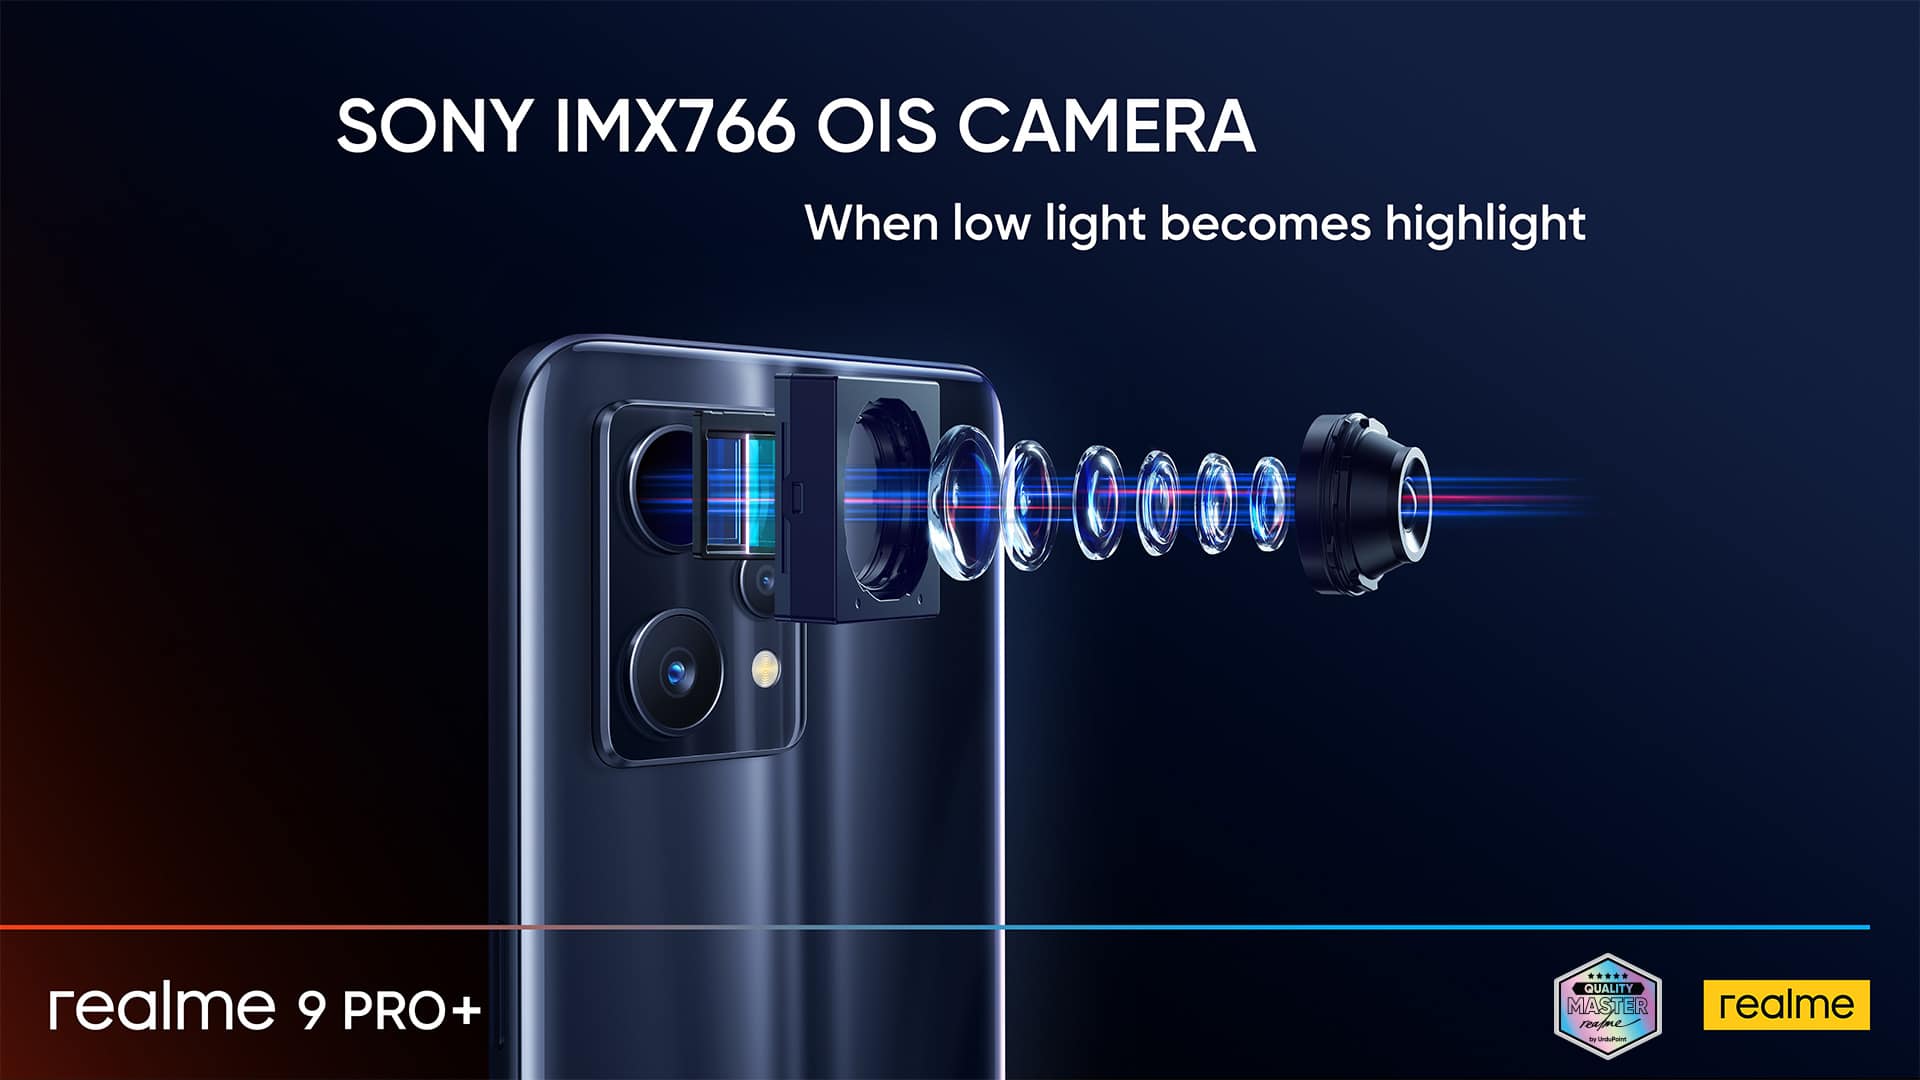 realme Leaps Ahead with the First-in-Segment Sony IMX766 OIS Sensor on realme 9 Pro+